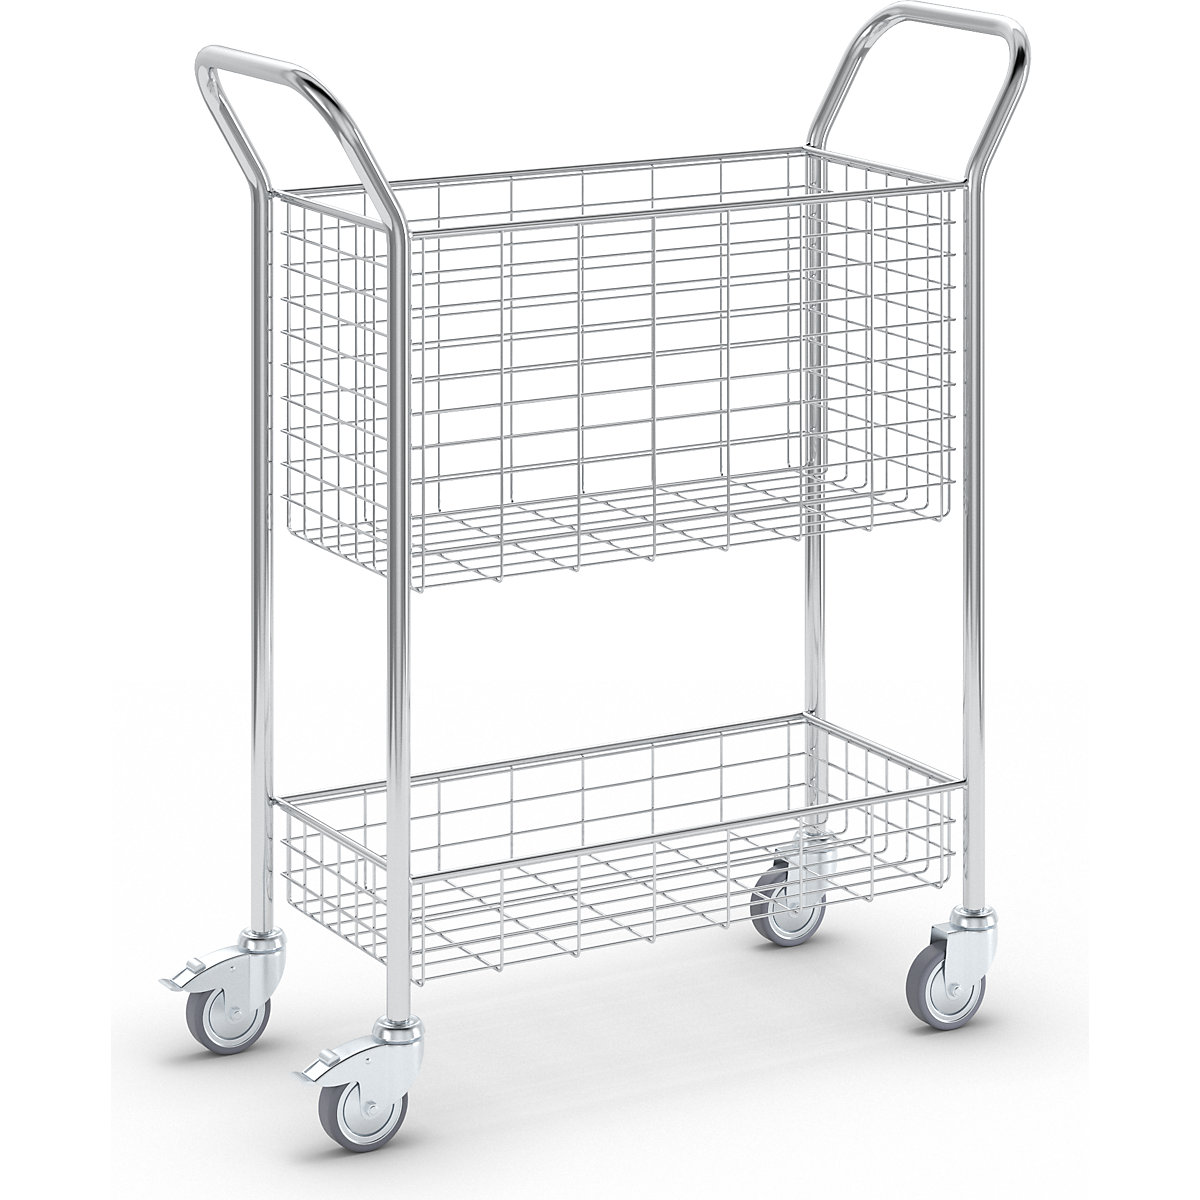 Office and mail distribution trolley – eurokraft pro, max. load 200 kg, white aluminium, LxWxH 1005 x 380 x 1245 mm, 2 shelves-3